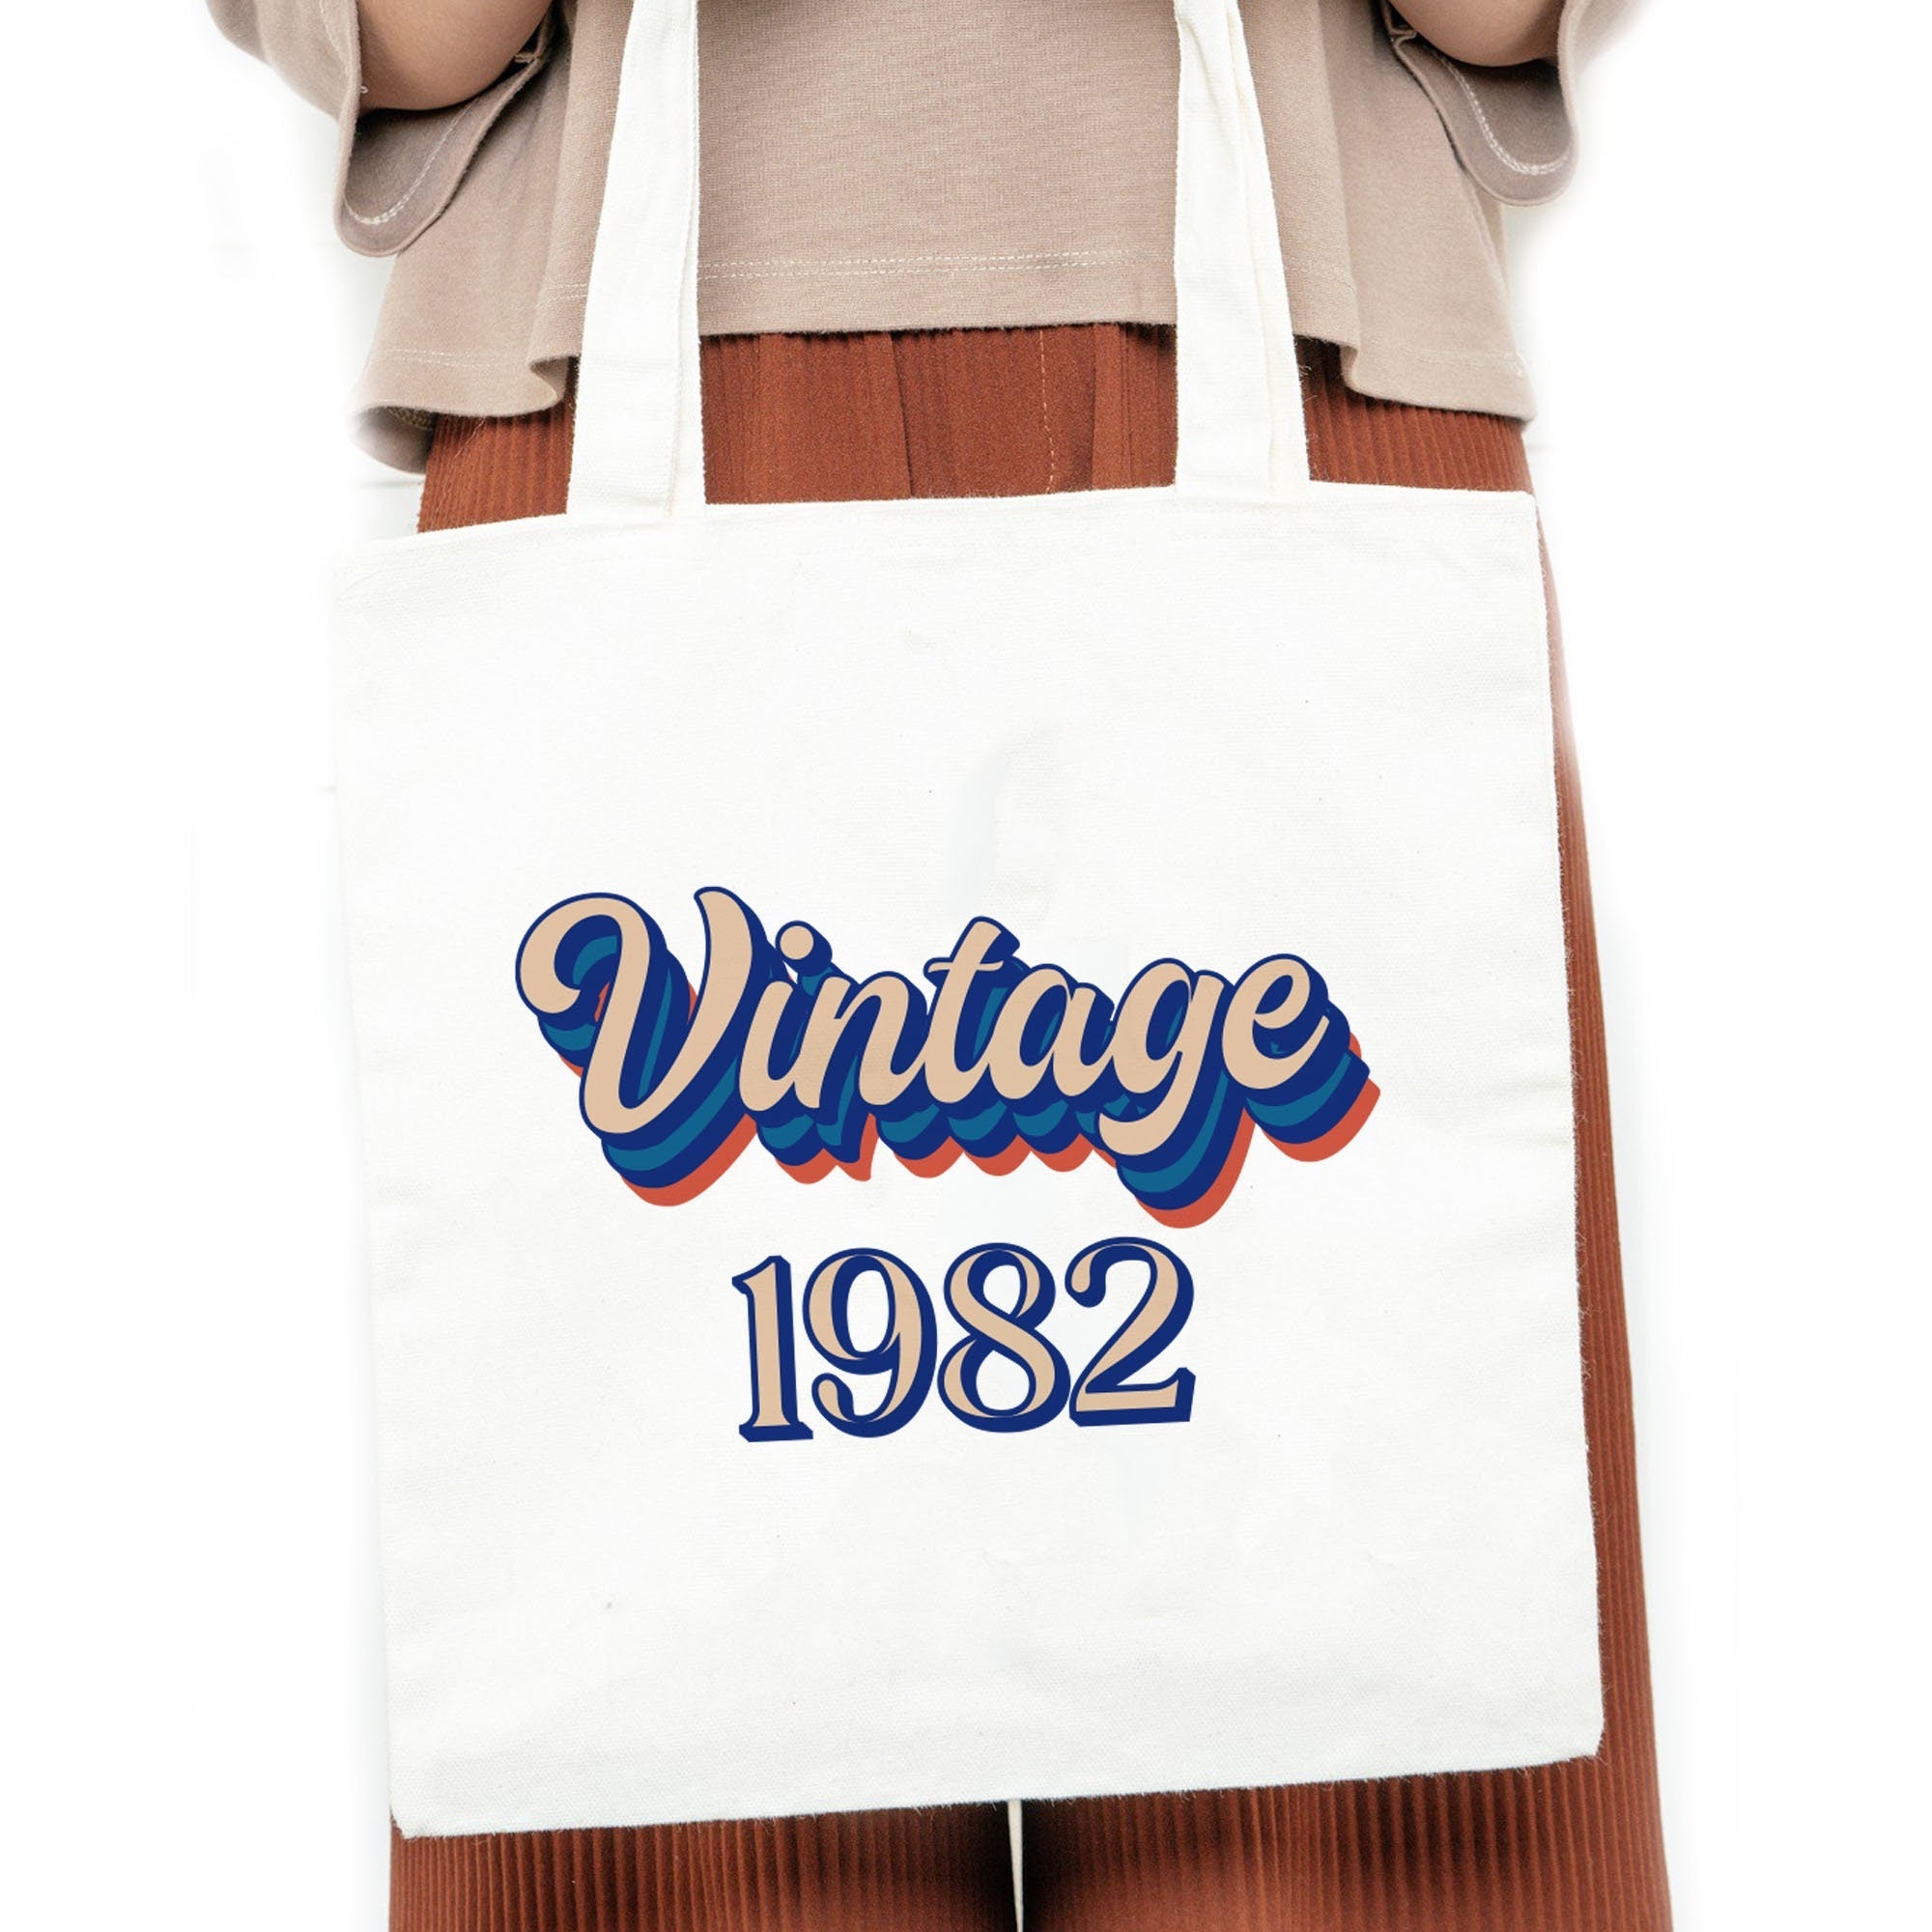 Birthday Year Tote Bag, Vintage 2002 1992 1982 1972 Etc, Birthday Gift For Her, Gift For Women